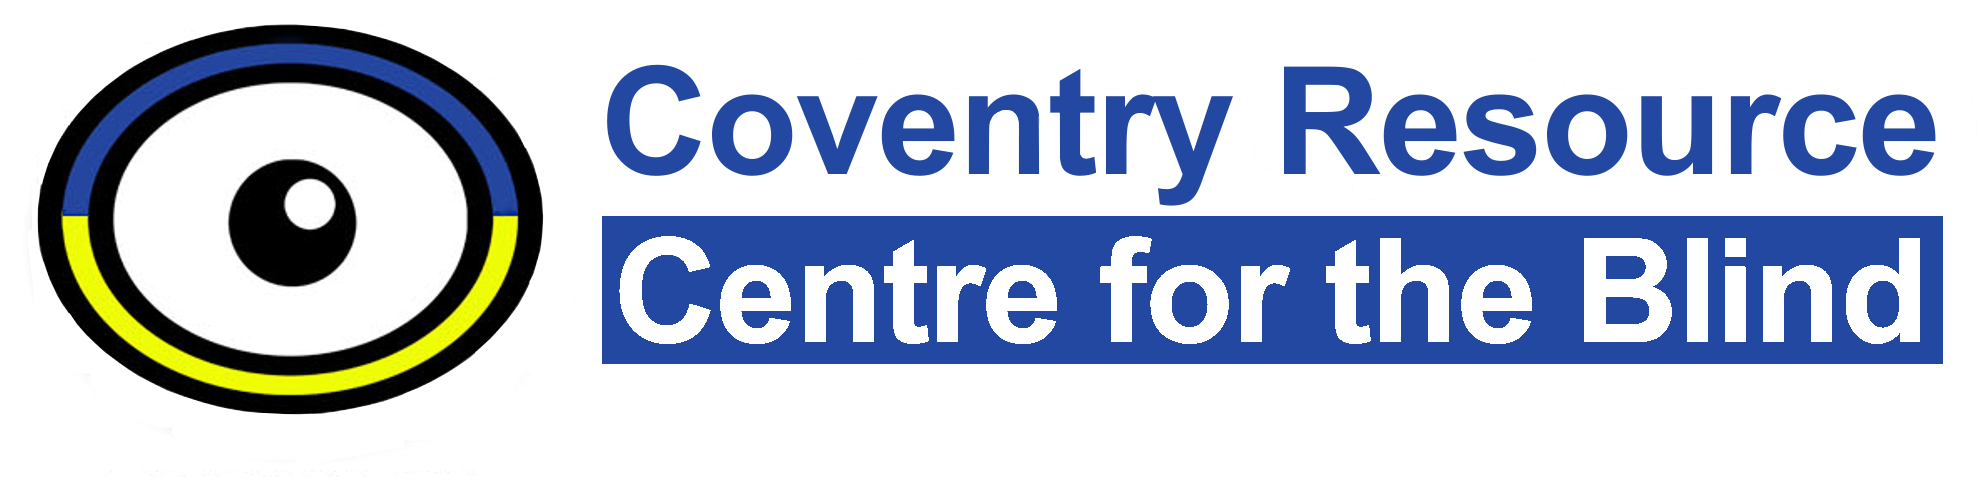 Coventry Resource Centre for the Blind Logo